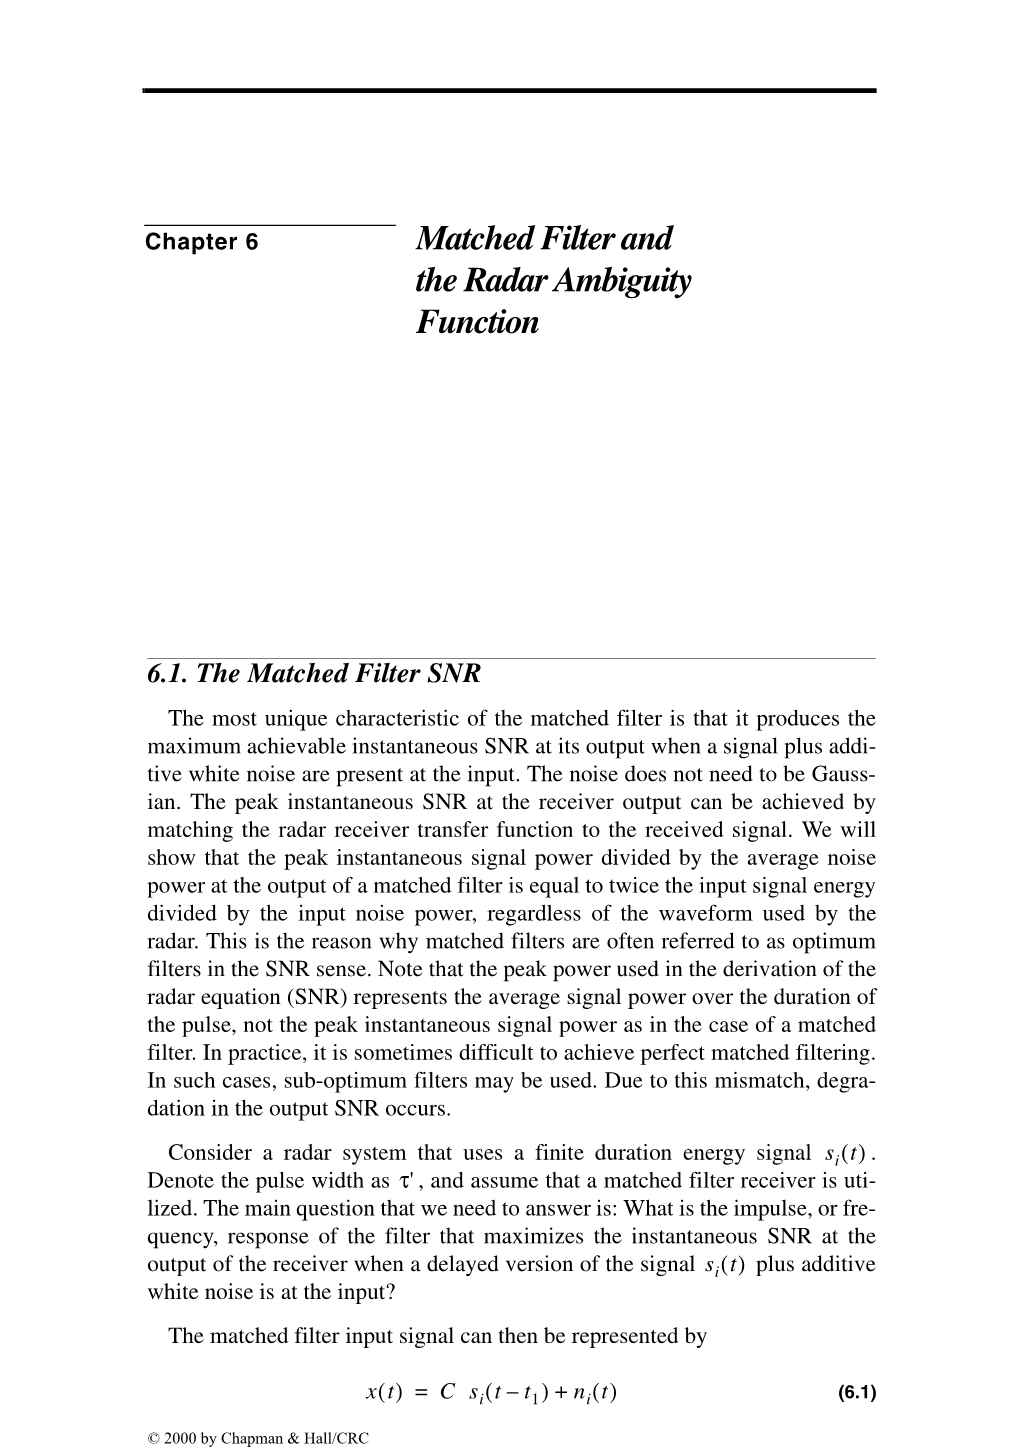 Chapter 6: Matched Filter and the Radar Ambiguity Function